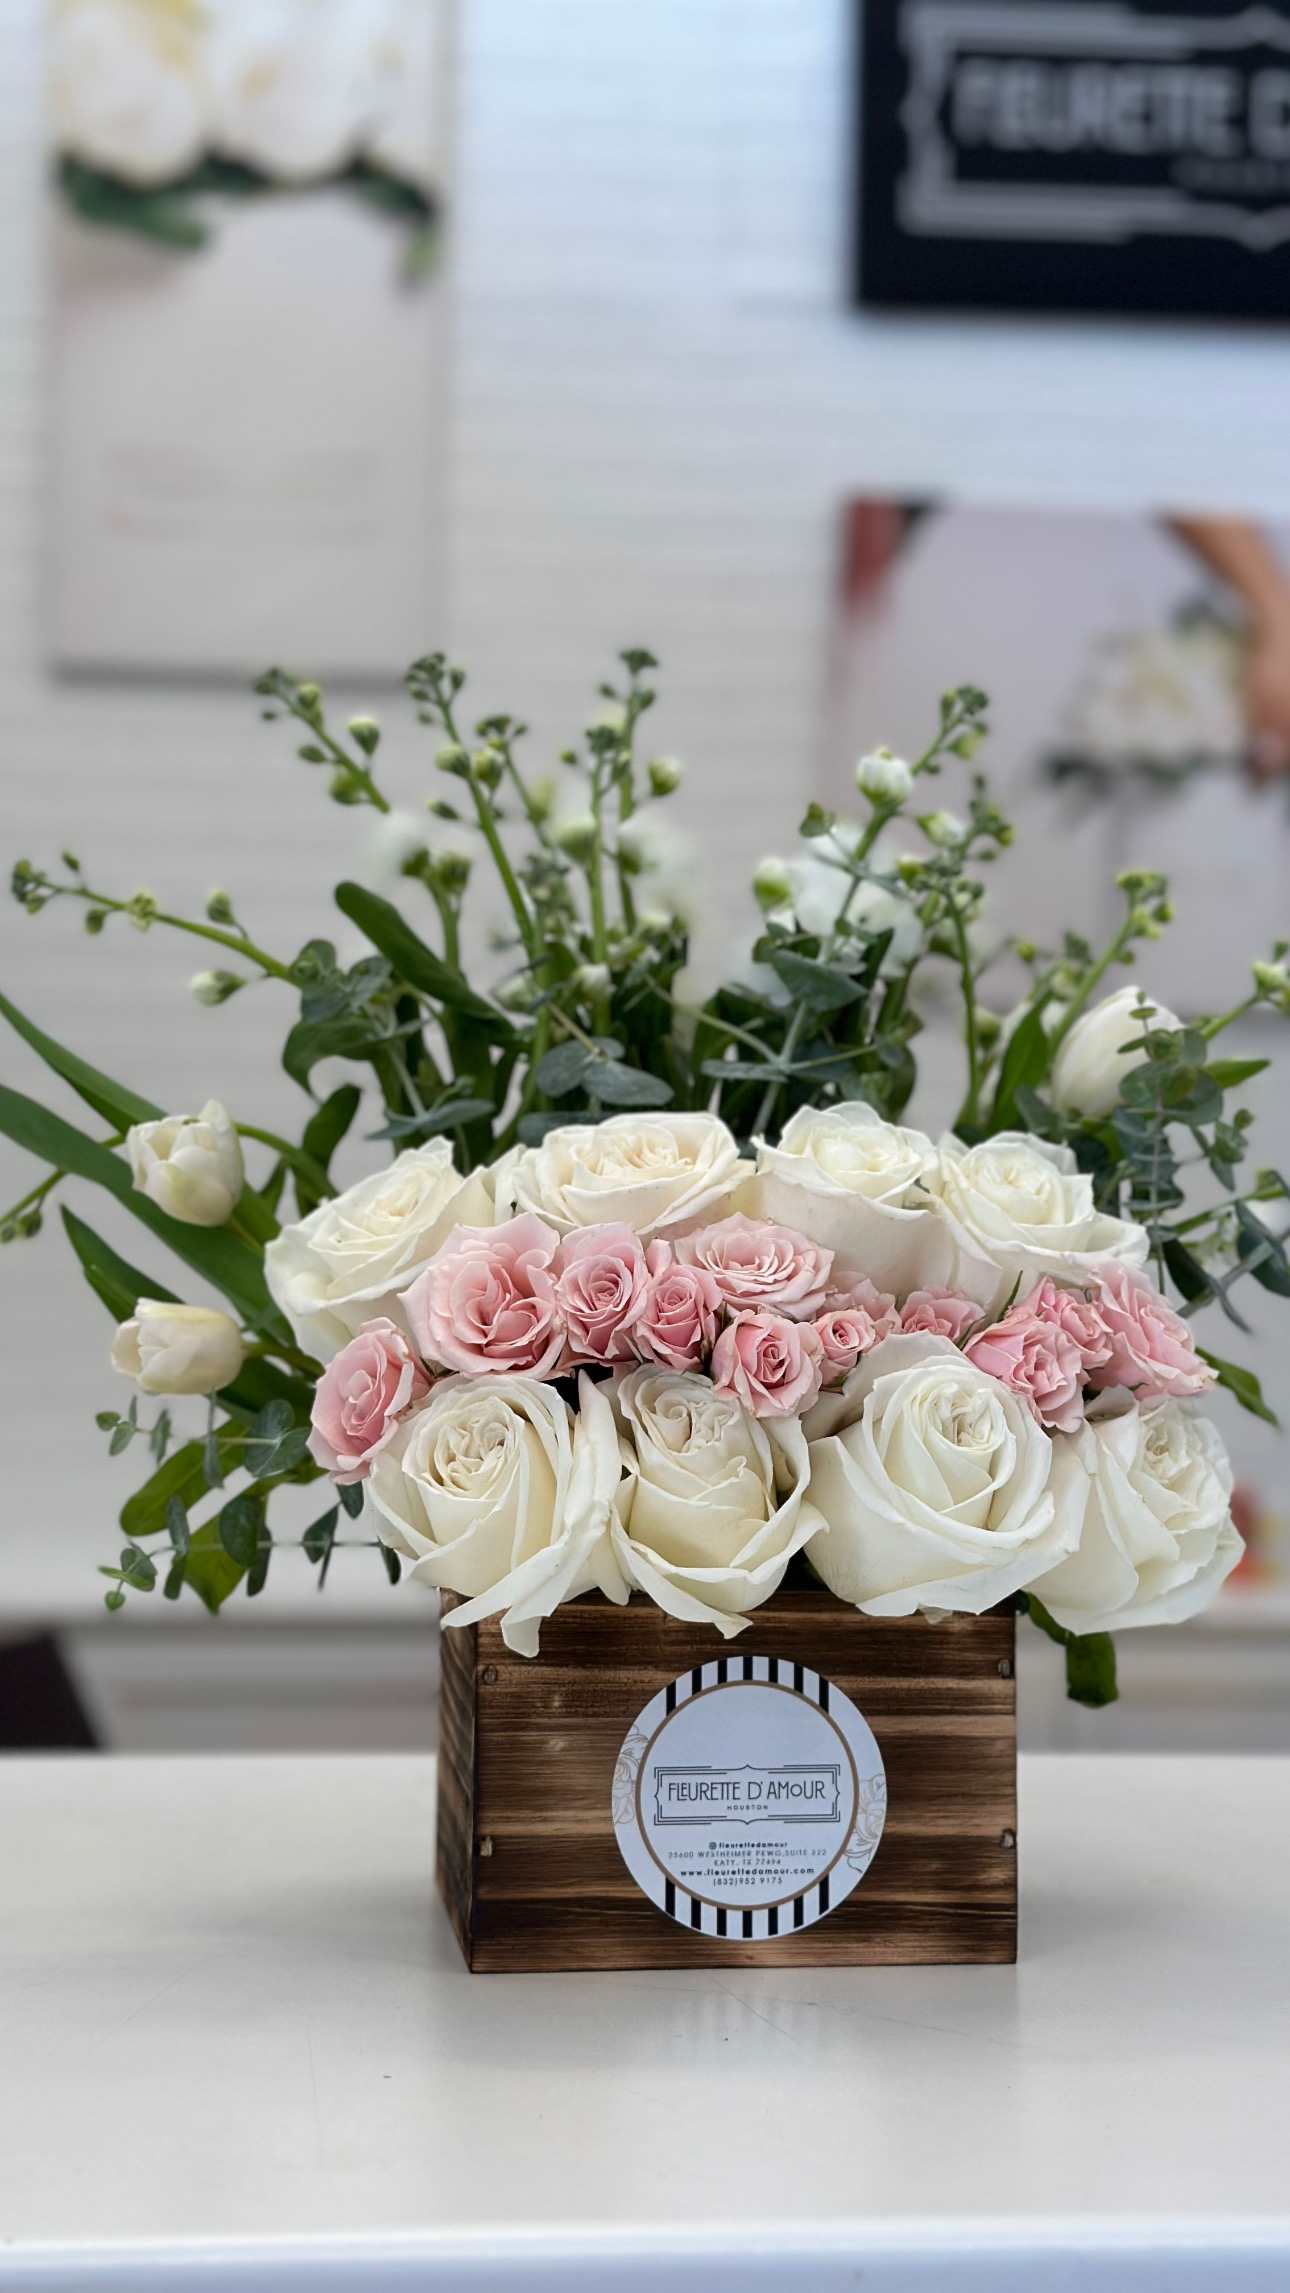 CELIA PINK -  Introducing &quot;Celia,&quot; a wooden box arrangement featuring 10 white roses, light pink baby roses, and white stock flowers.  Experience the charm of &quot;Celia&quot; with its elegant combination of flowers. Order now to add a touch of sophistication to any space with this exquisite wooden box arrangement.